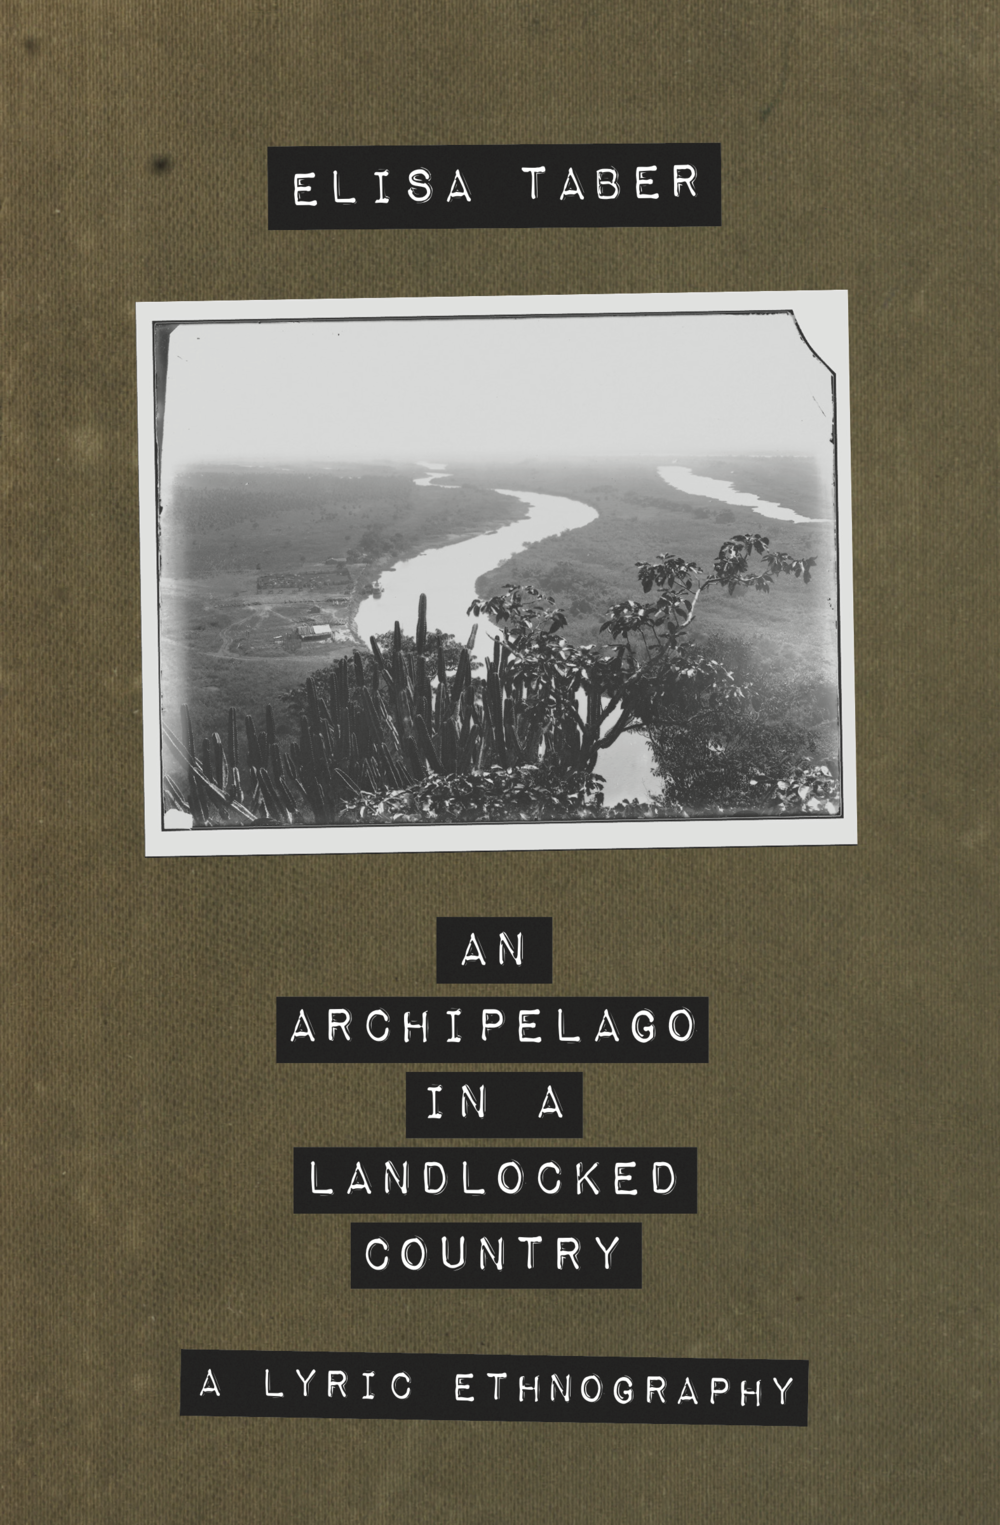 An Archipelago In a Landlocked Country_Elisa Taber FRONT COVER.png